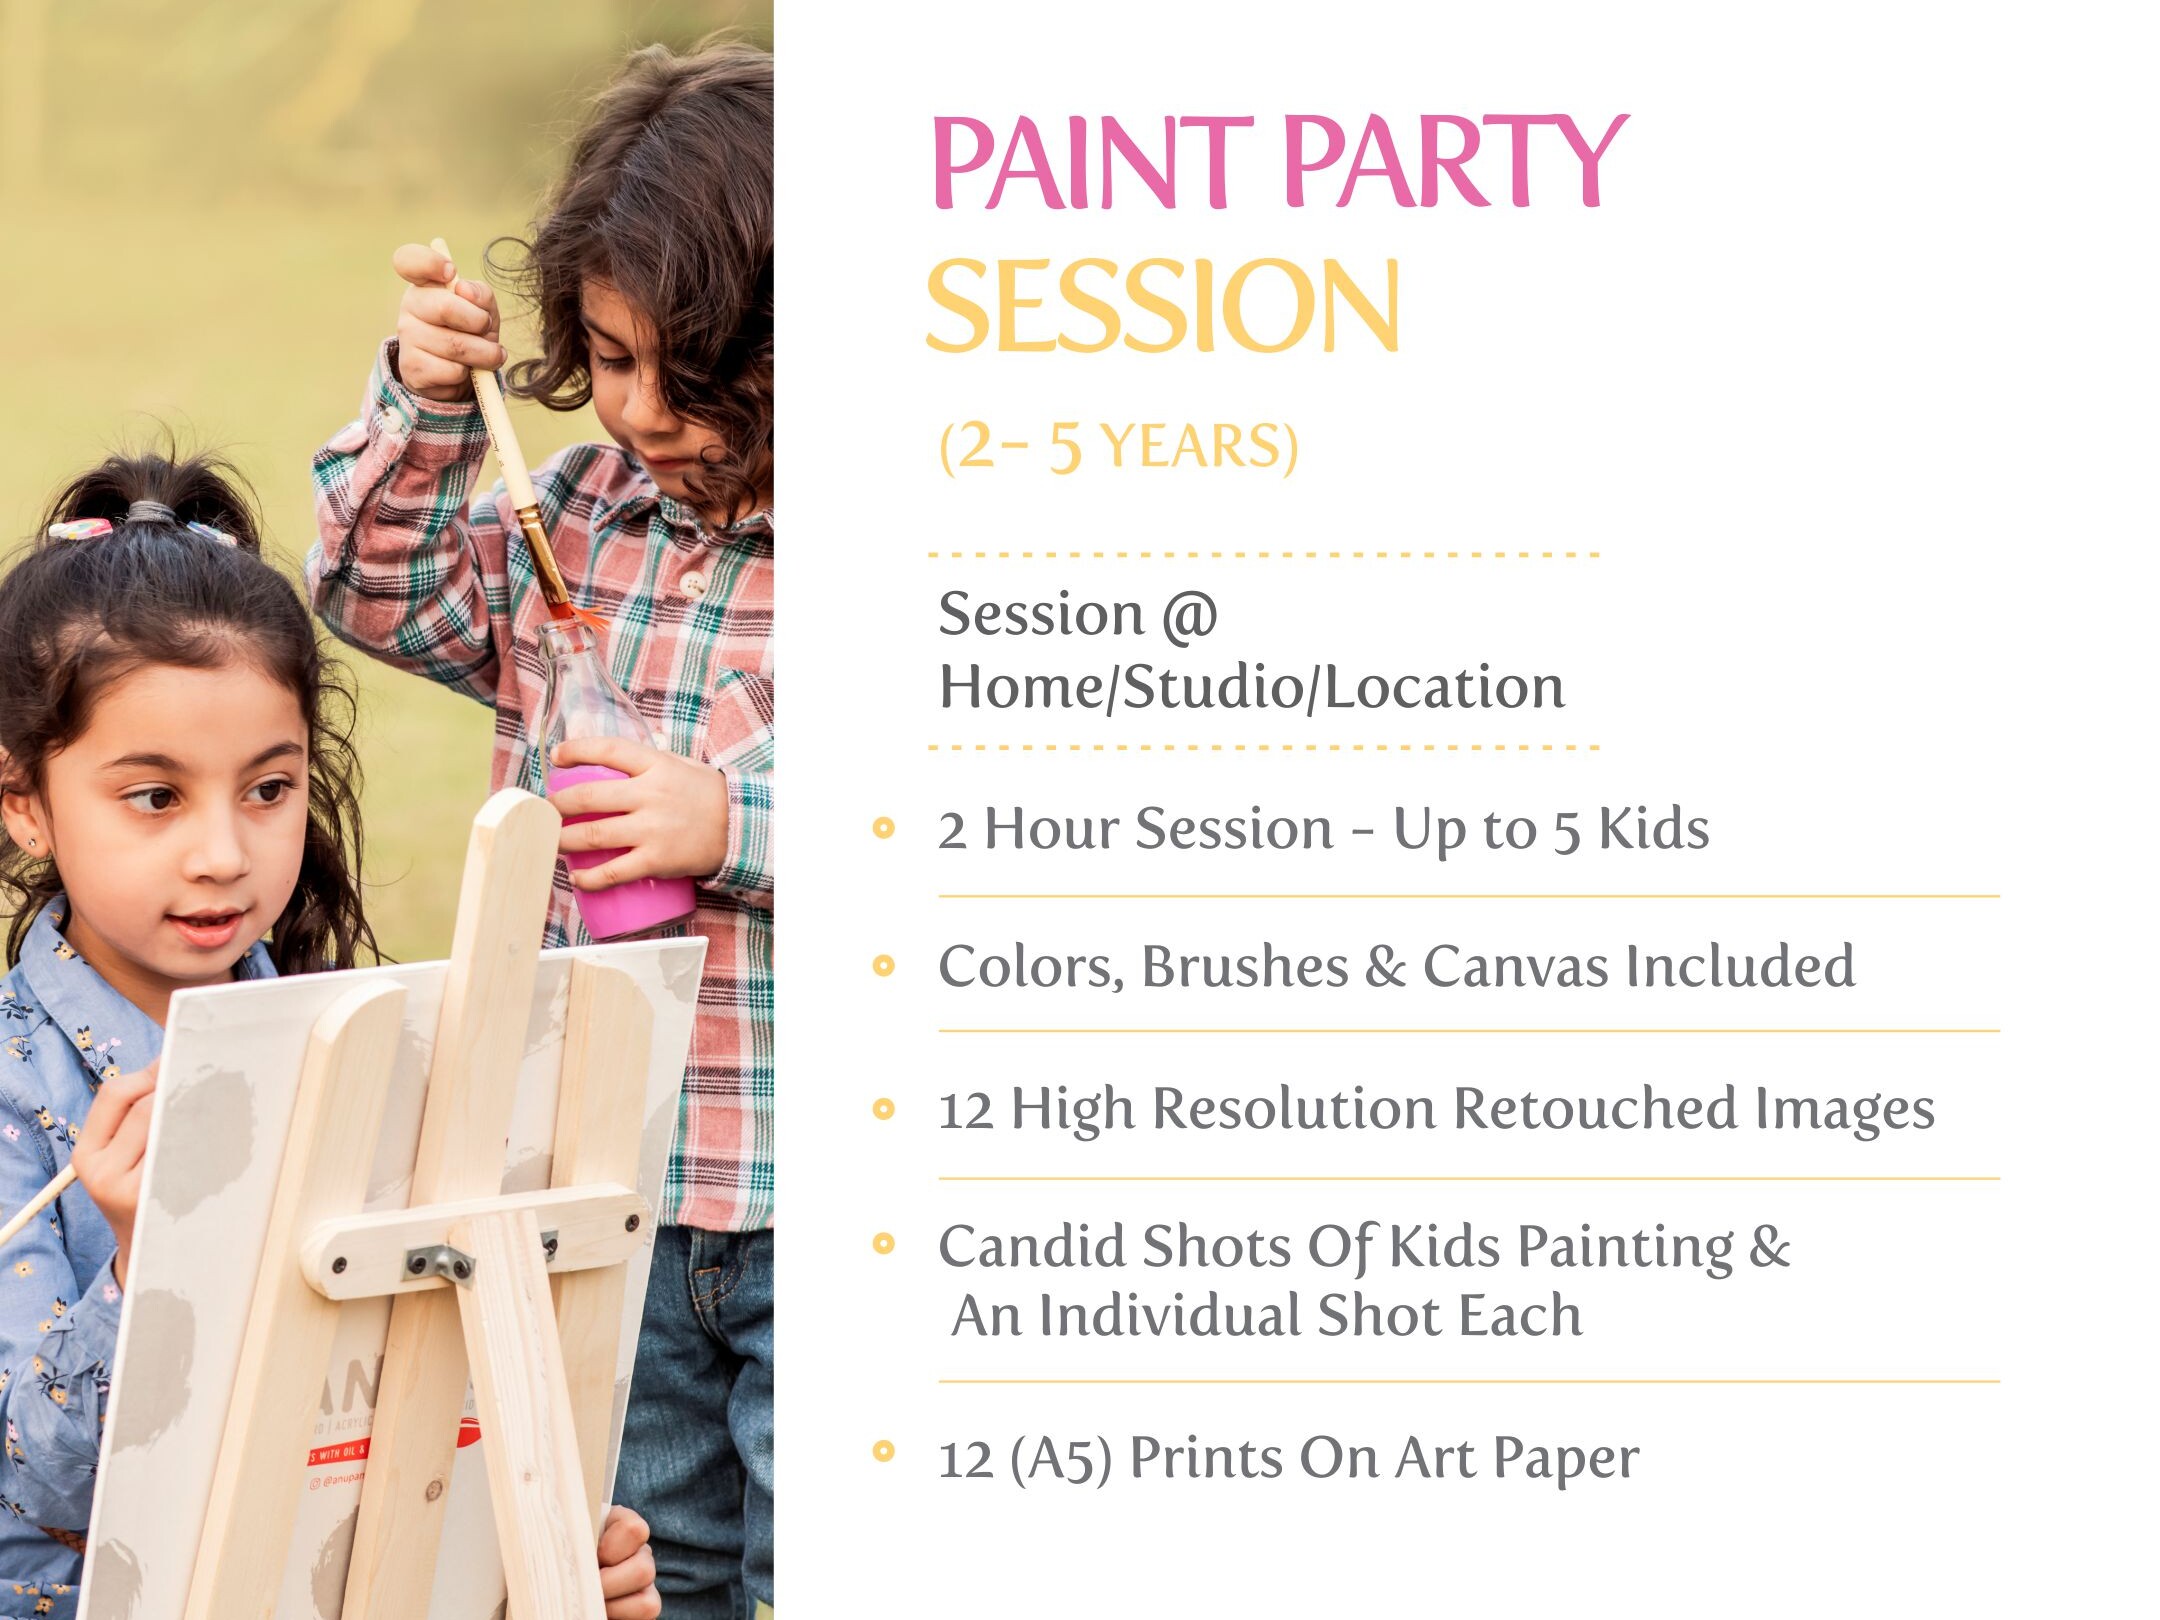 Paint Party Photography Session